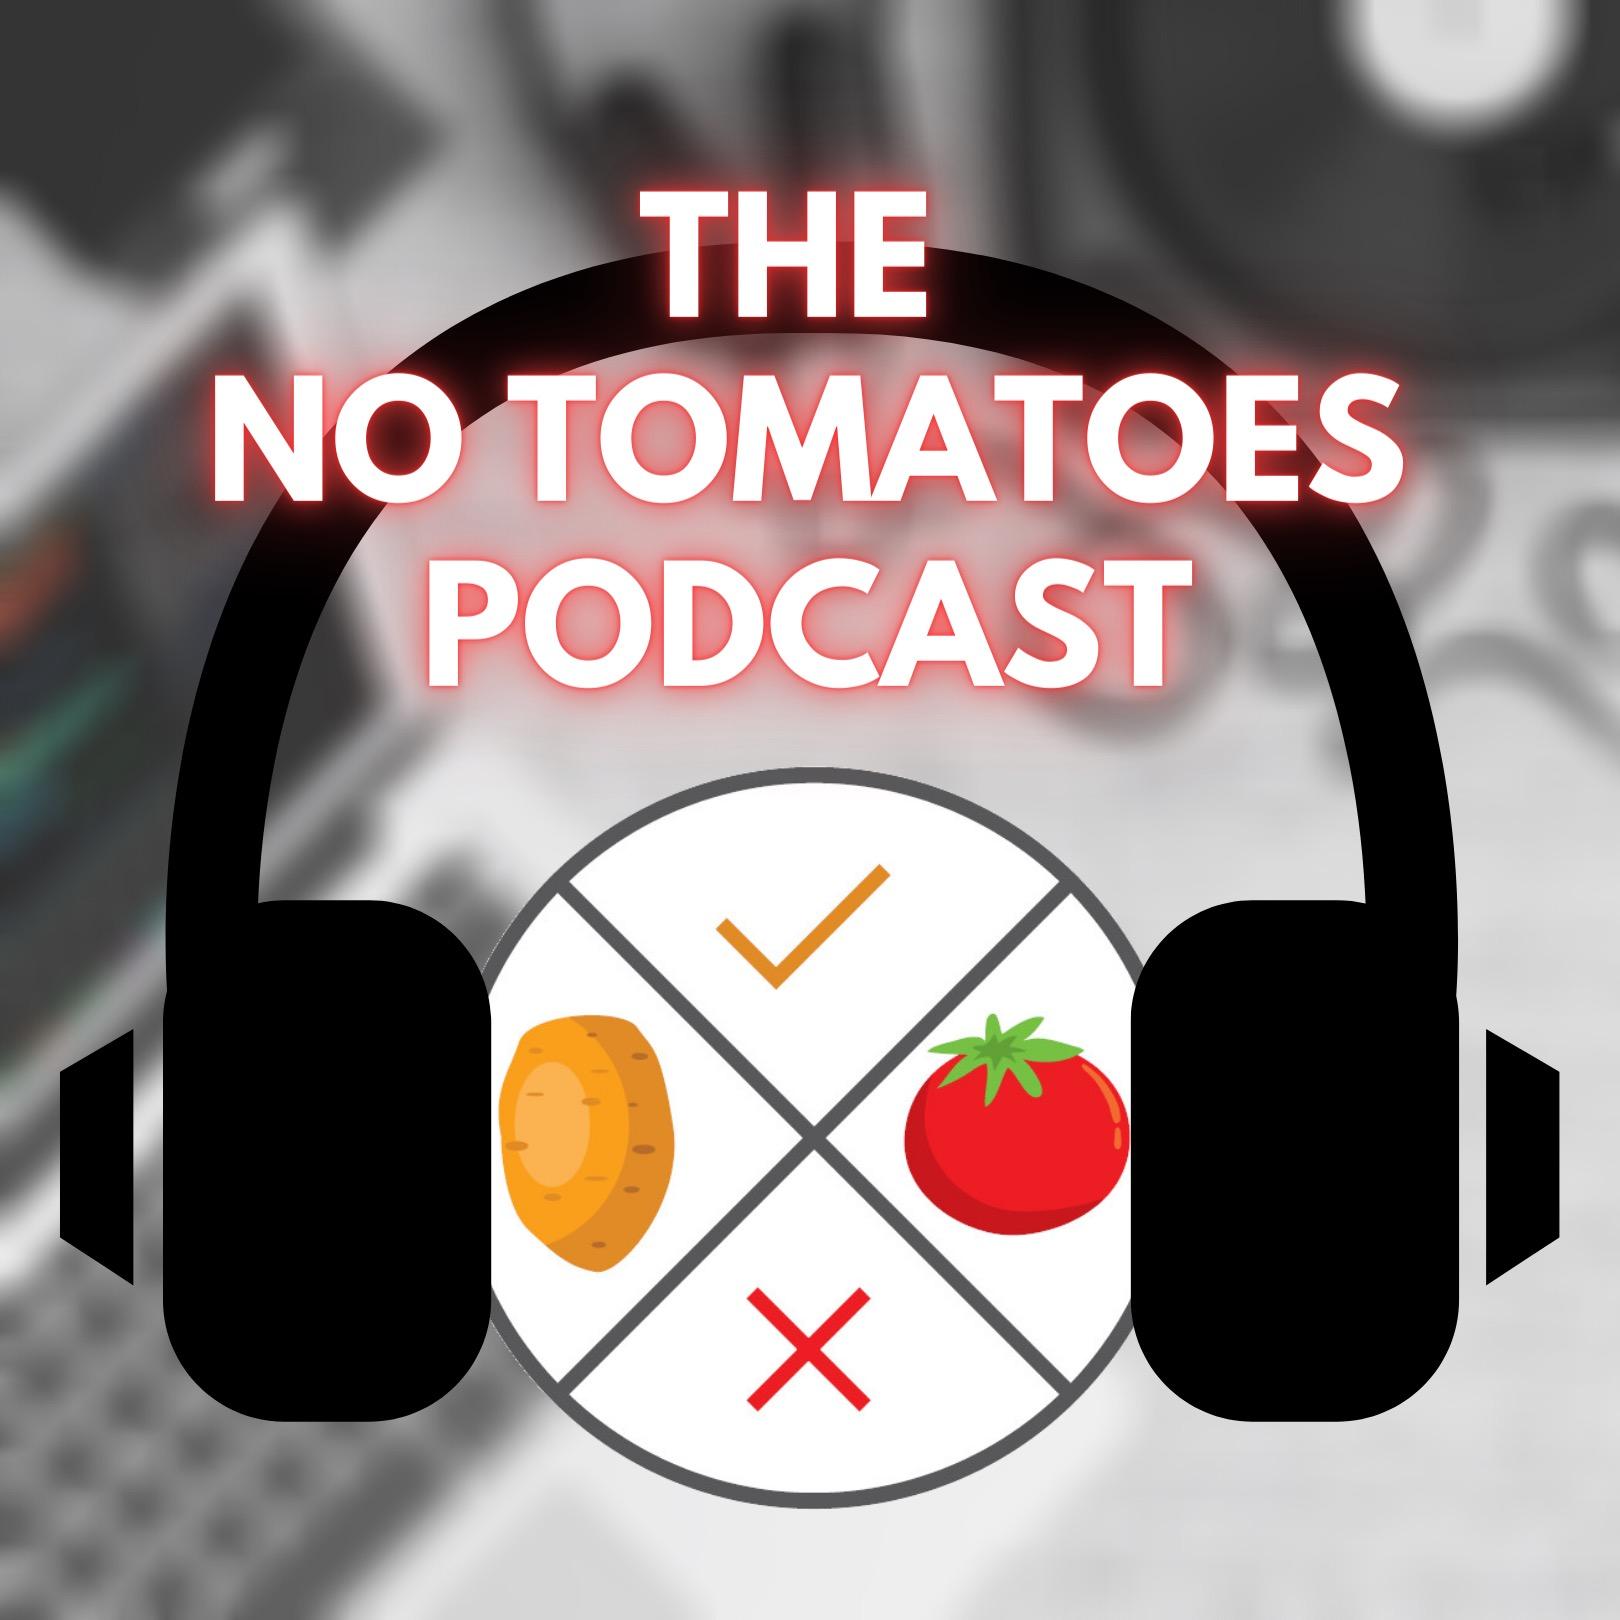 The No Tomatoes Podcast